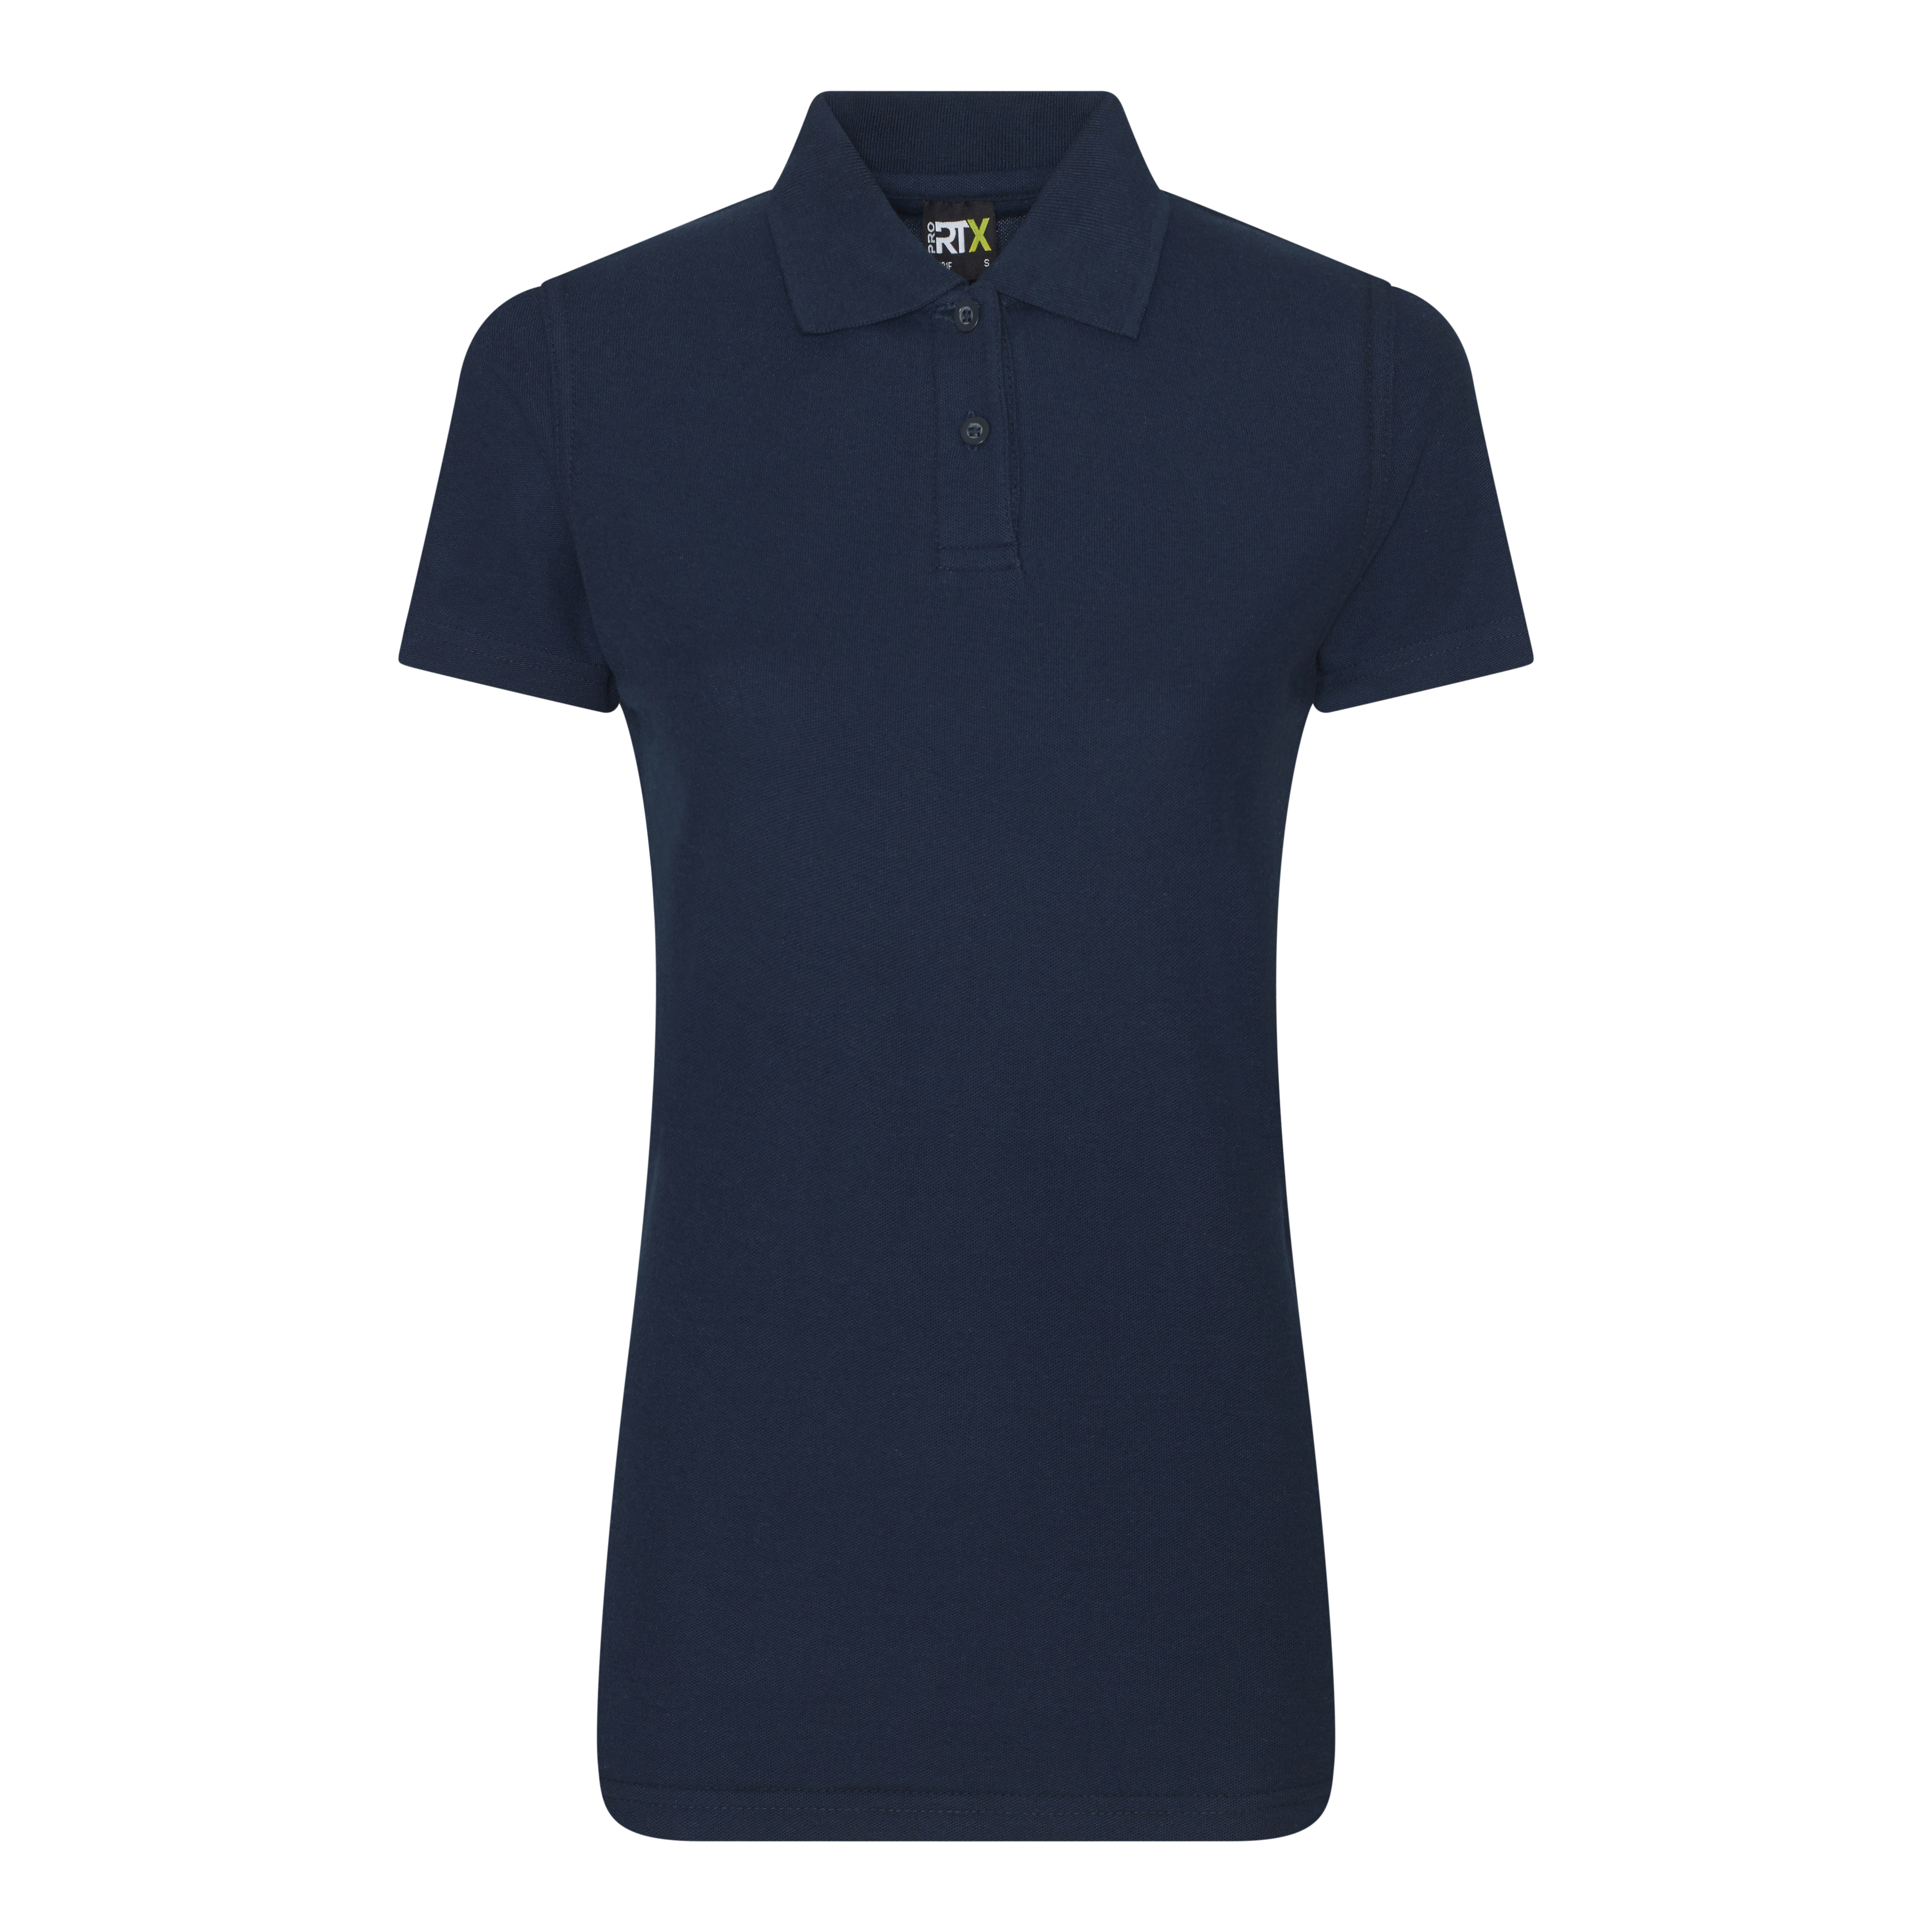 ax-httpswebsystems.s3.amazonaws.comtmp_for_downloadpro-rtx-ladies-pro-polo-navy.jpg